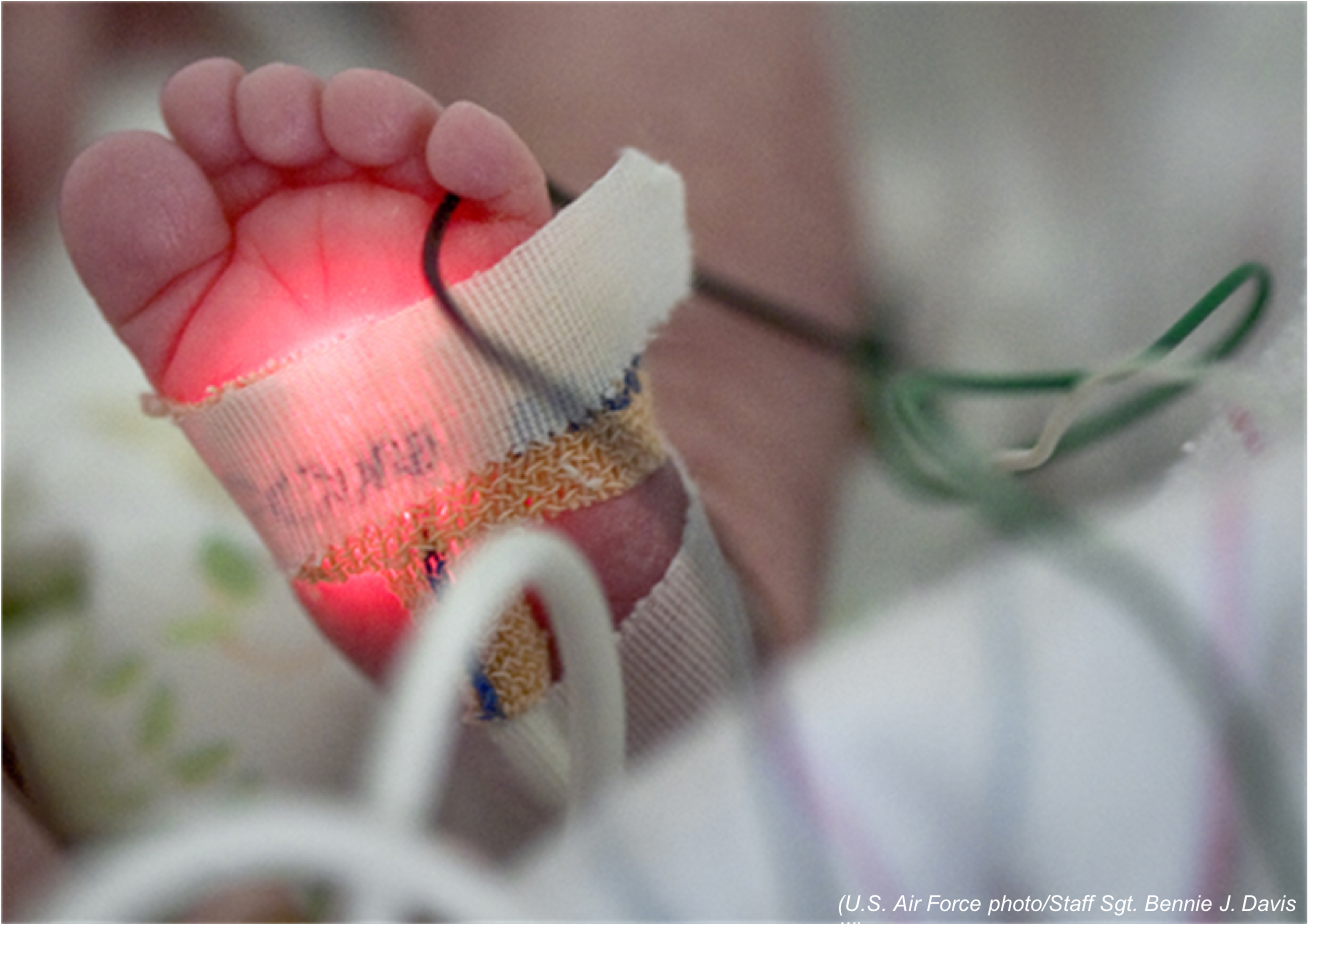 JAMA Study Suggests Antibiotic Use Among Premature Infants May Be Unnecessarily High: Public Health Watch